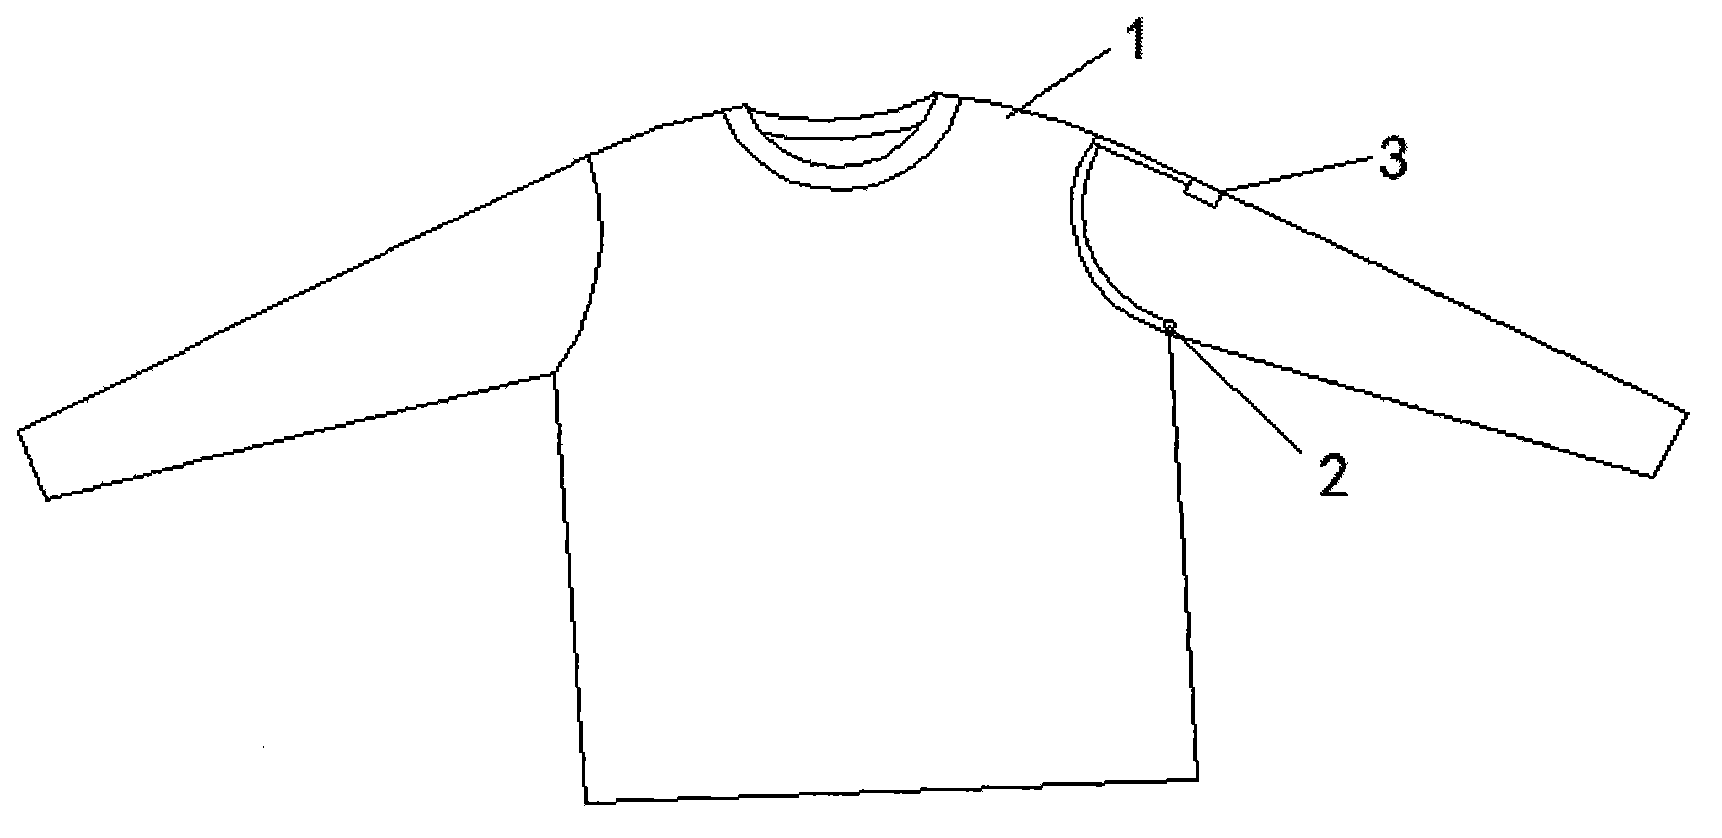 Light transmitting clothes with thermometer